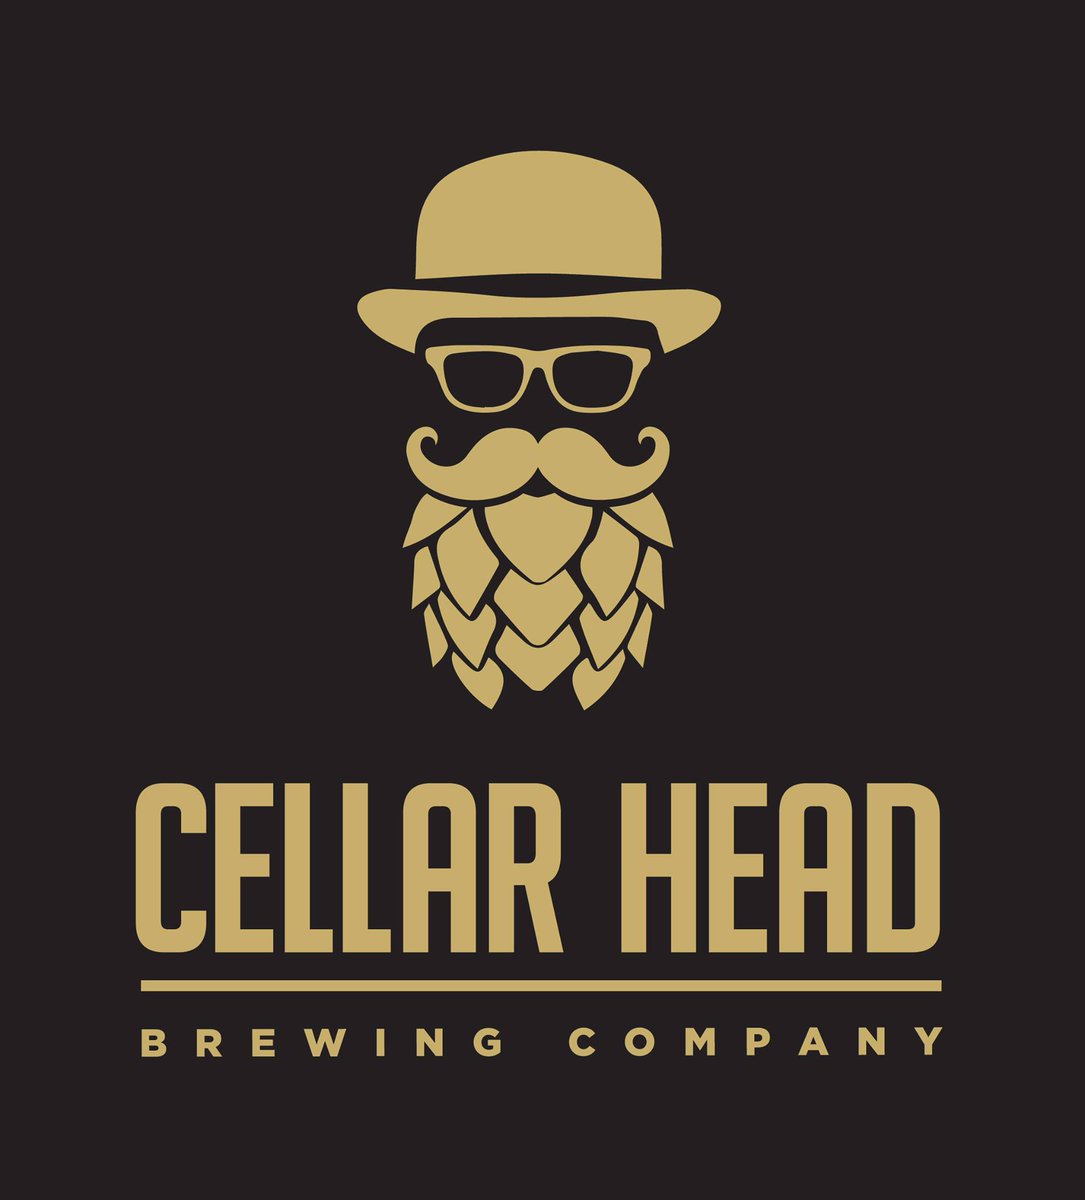 CSPA Artisan Tasting Evening - Friday 19th November
We'll be highlighting our fabulous local suppliers attending the Artisan Tasting Evening over the next few weeks. First up Cellar Head Brewing Company: cellarheadbrewing.com
Buy your tickets now at:
cranbrookschoolparents.com/artisantasting